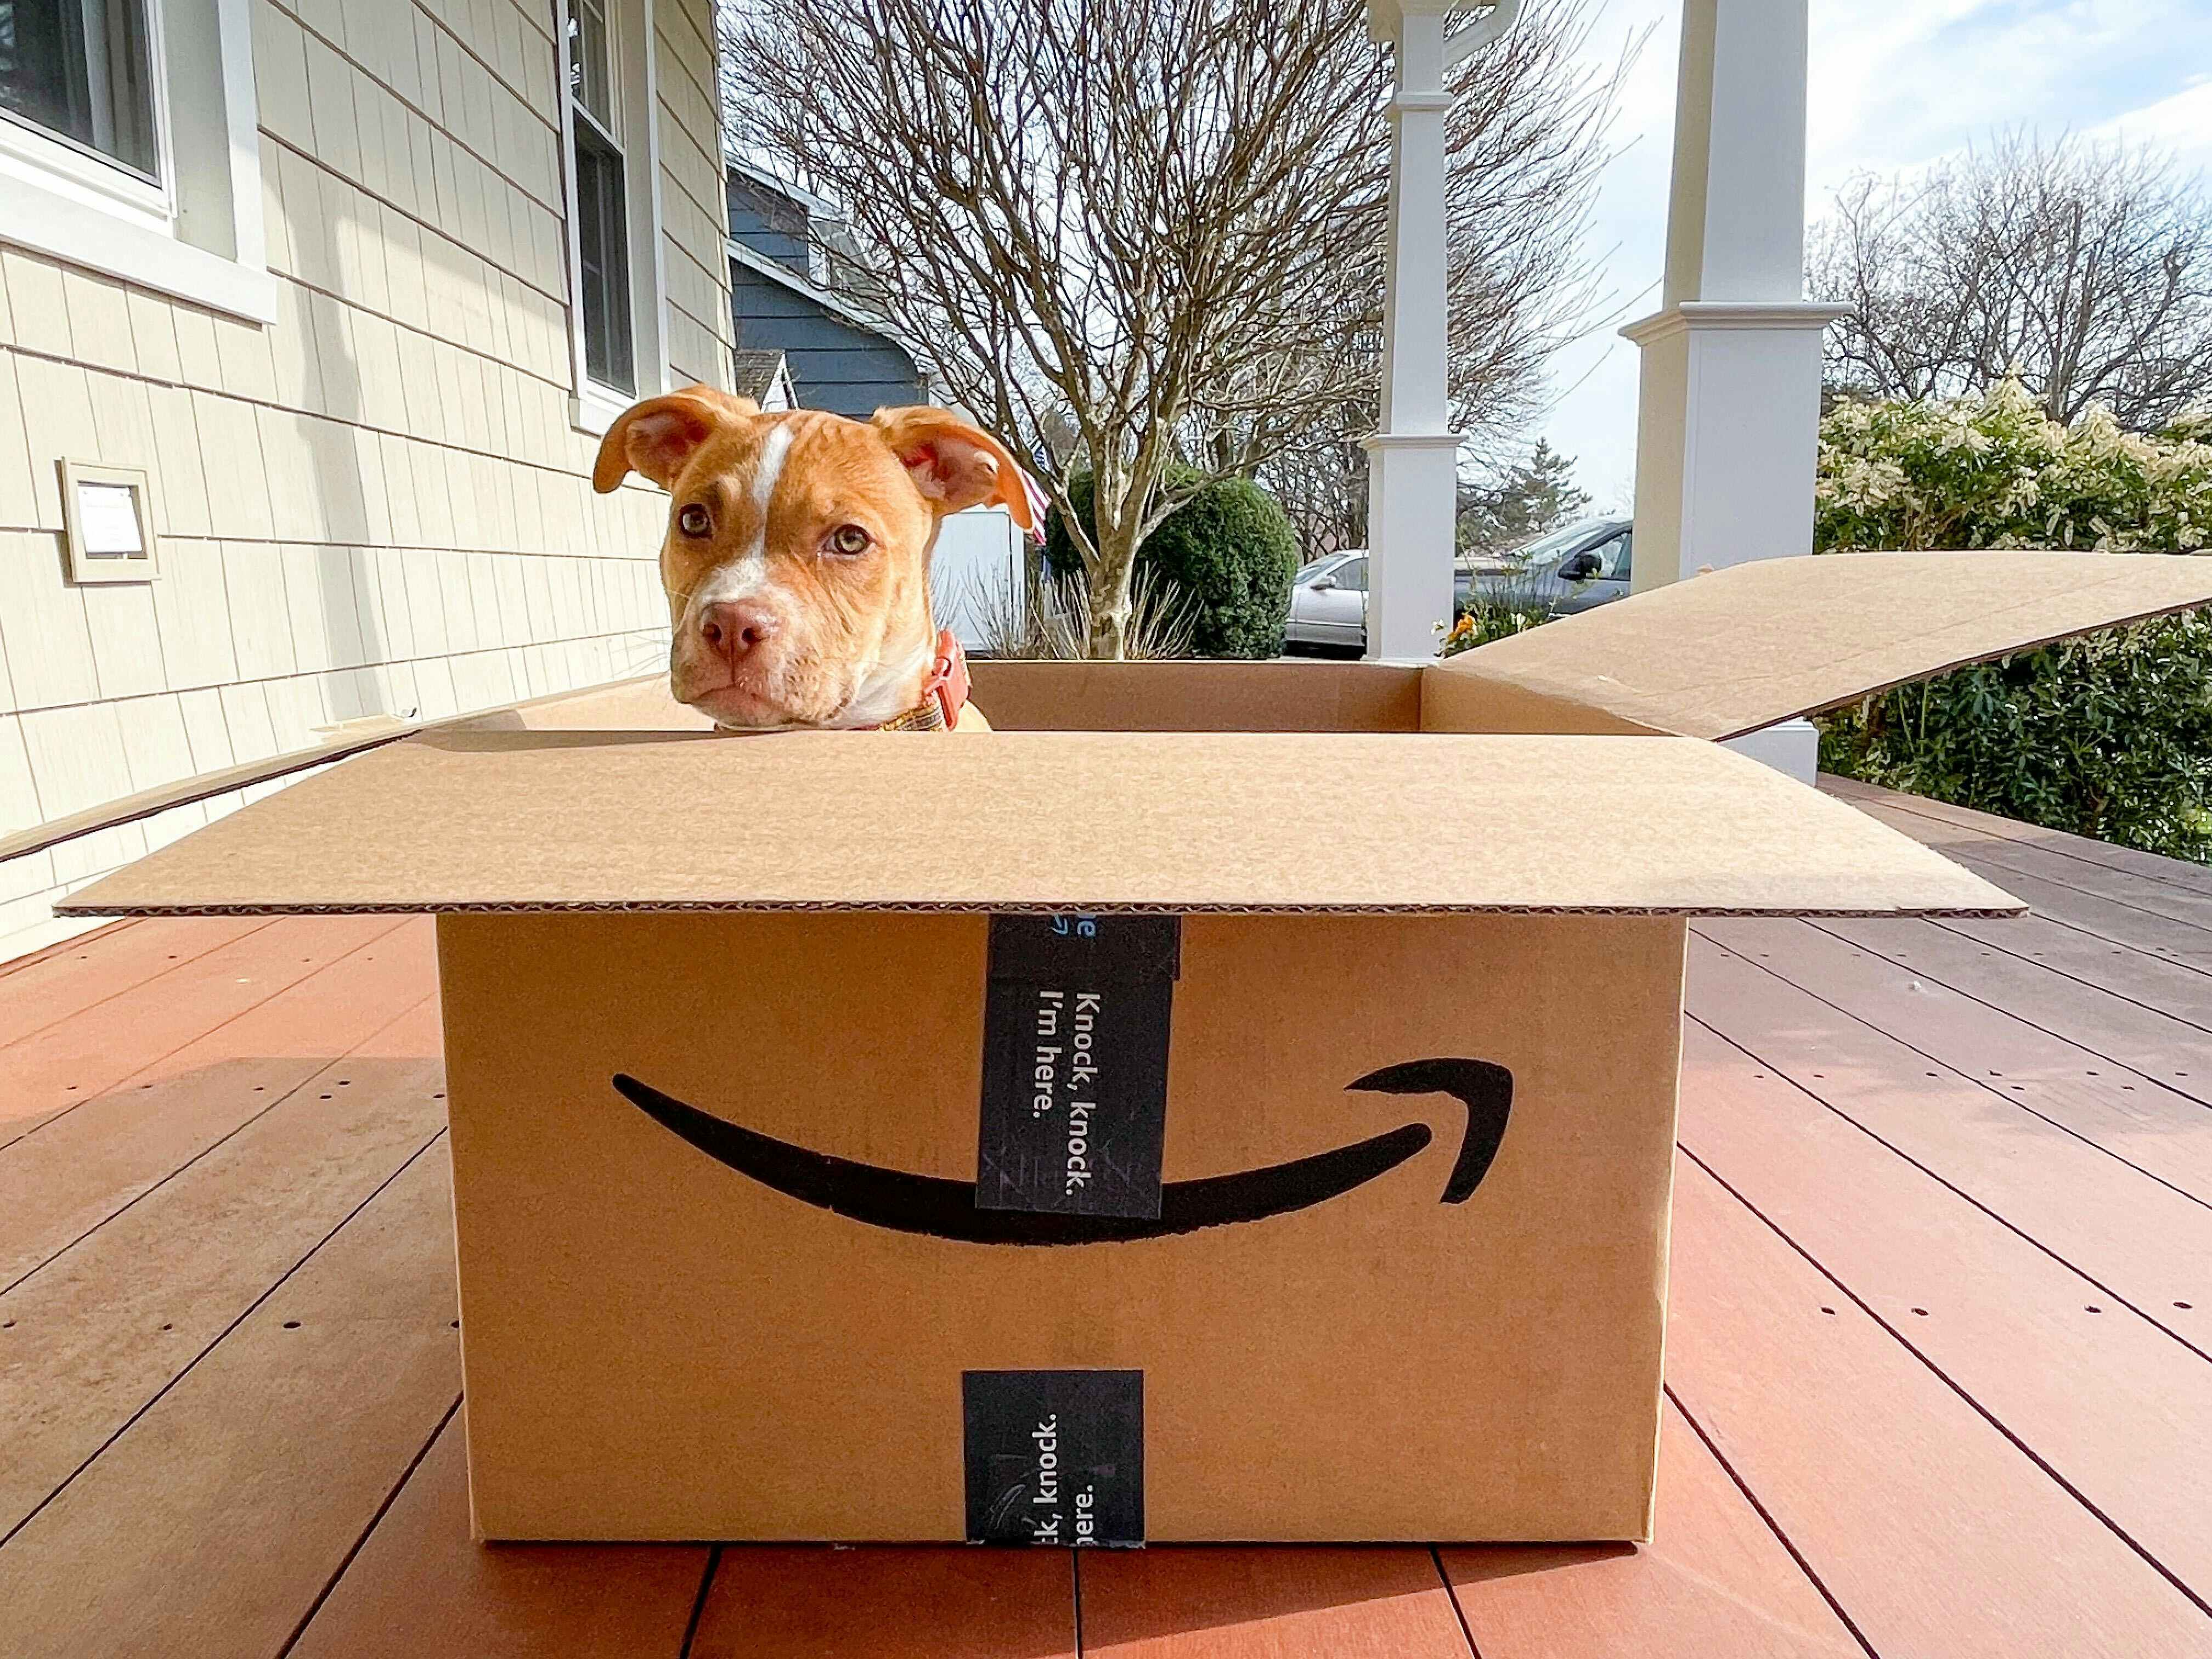 A light colored puppy in an open amazon box sitting on a front porch